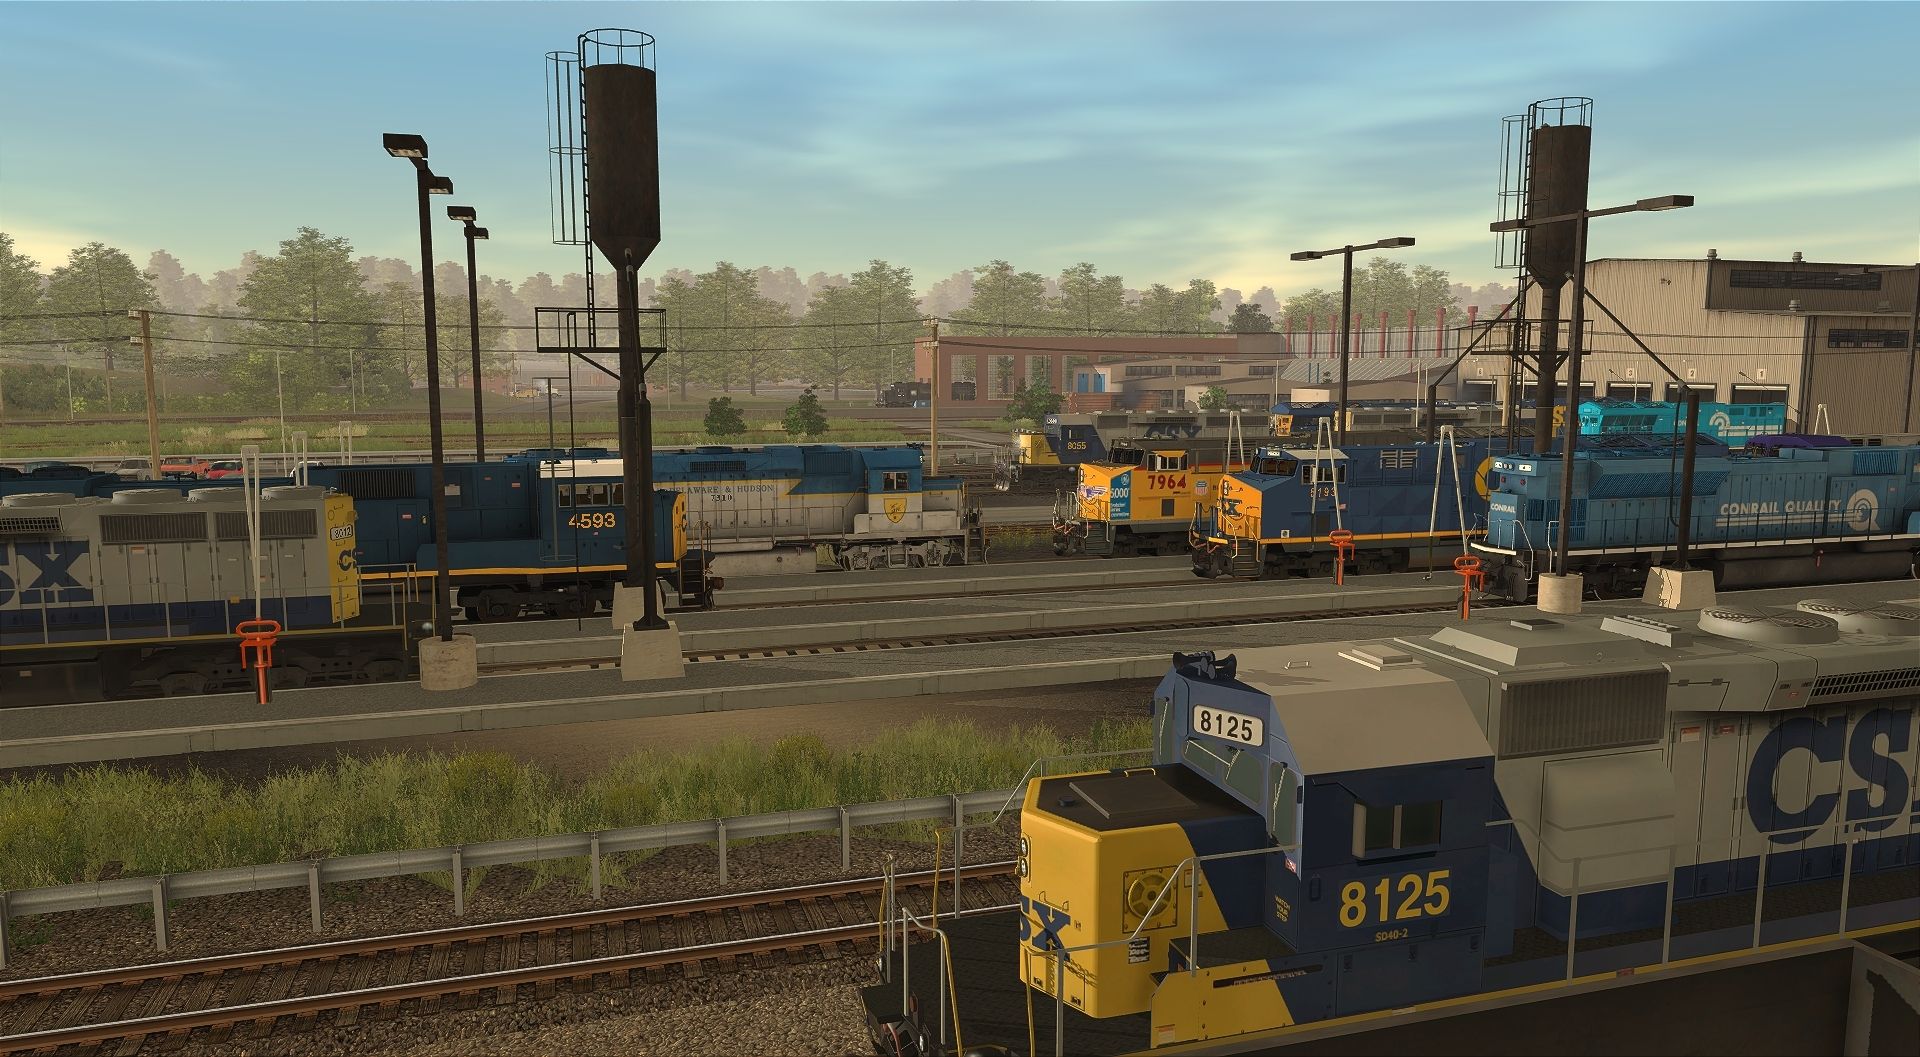 Yard-locos-pass-by-the-servicing-area..jpg